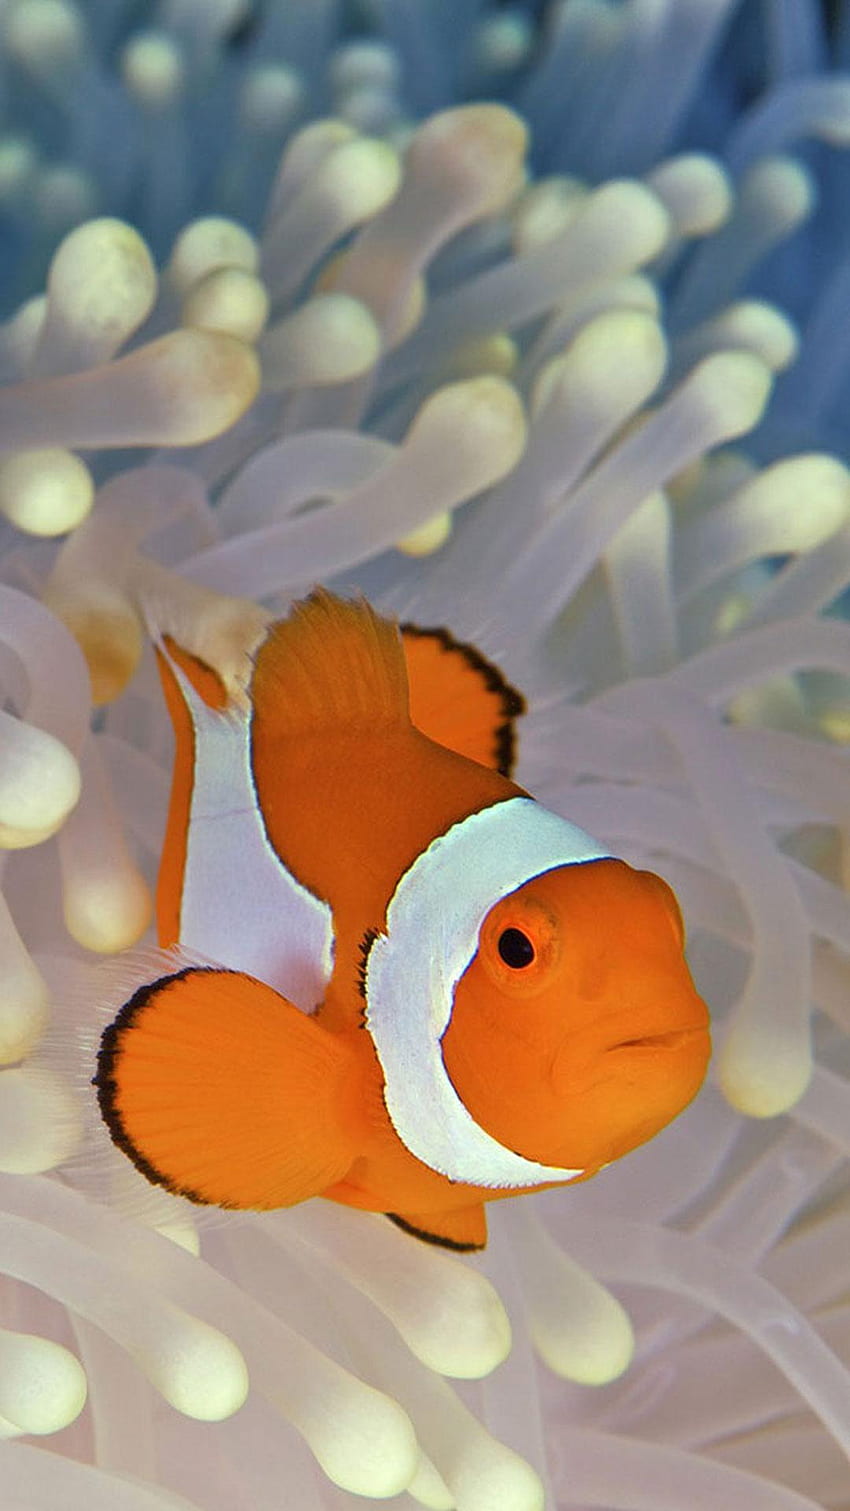 Download Theme for Original iPhone Clownfish Wallpaper HD APK 1.0.0 Latest  Version for Android at APKFab